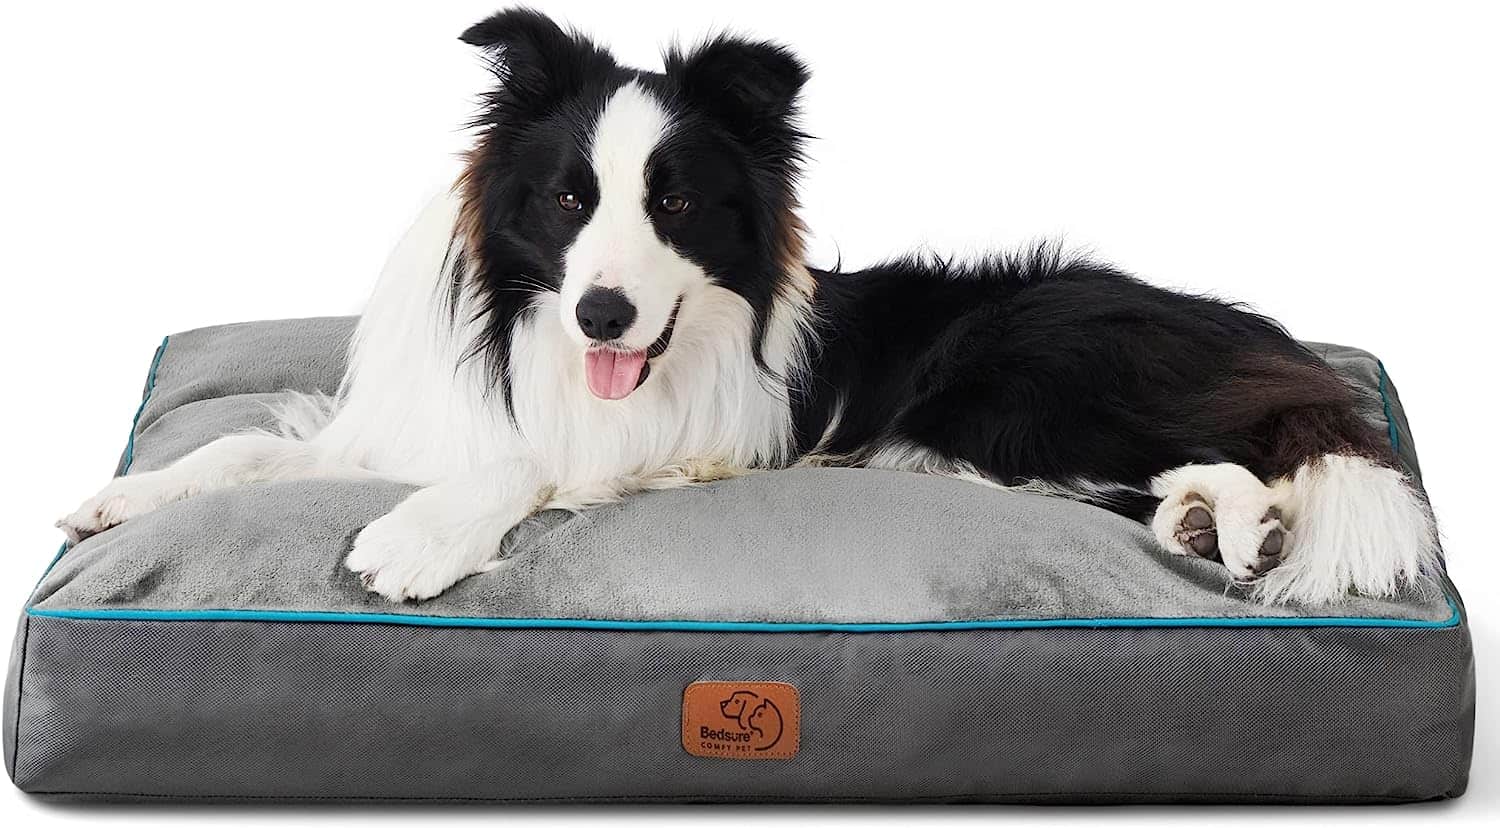 Bedsure Entire Waterproof Large Dog Bed - 4 inch Thicken Up to 80lbs Large Dog Bed with Removable Washable Cover, Pet Bed Mat Pillows, Grey